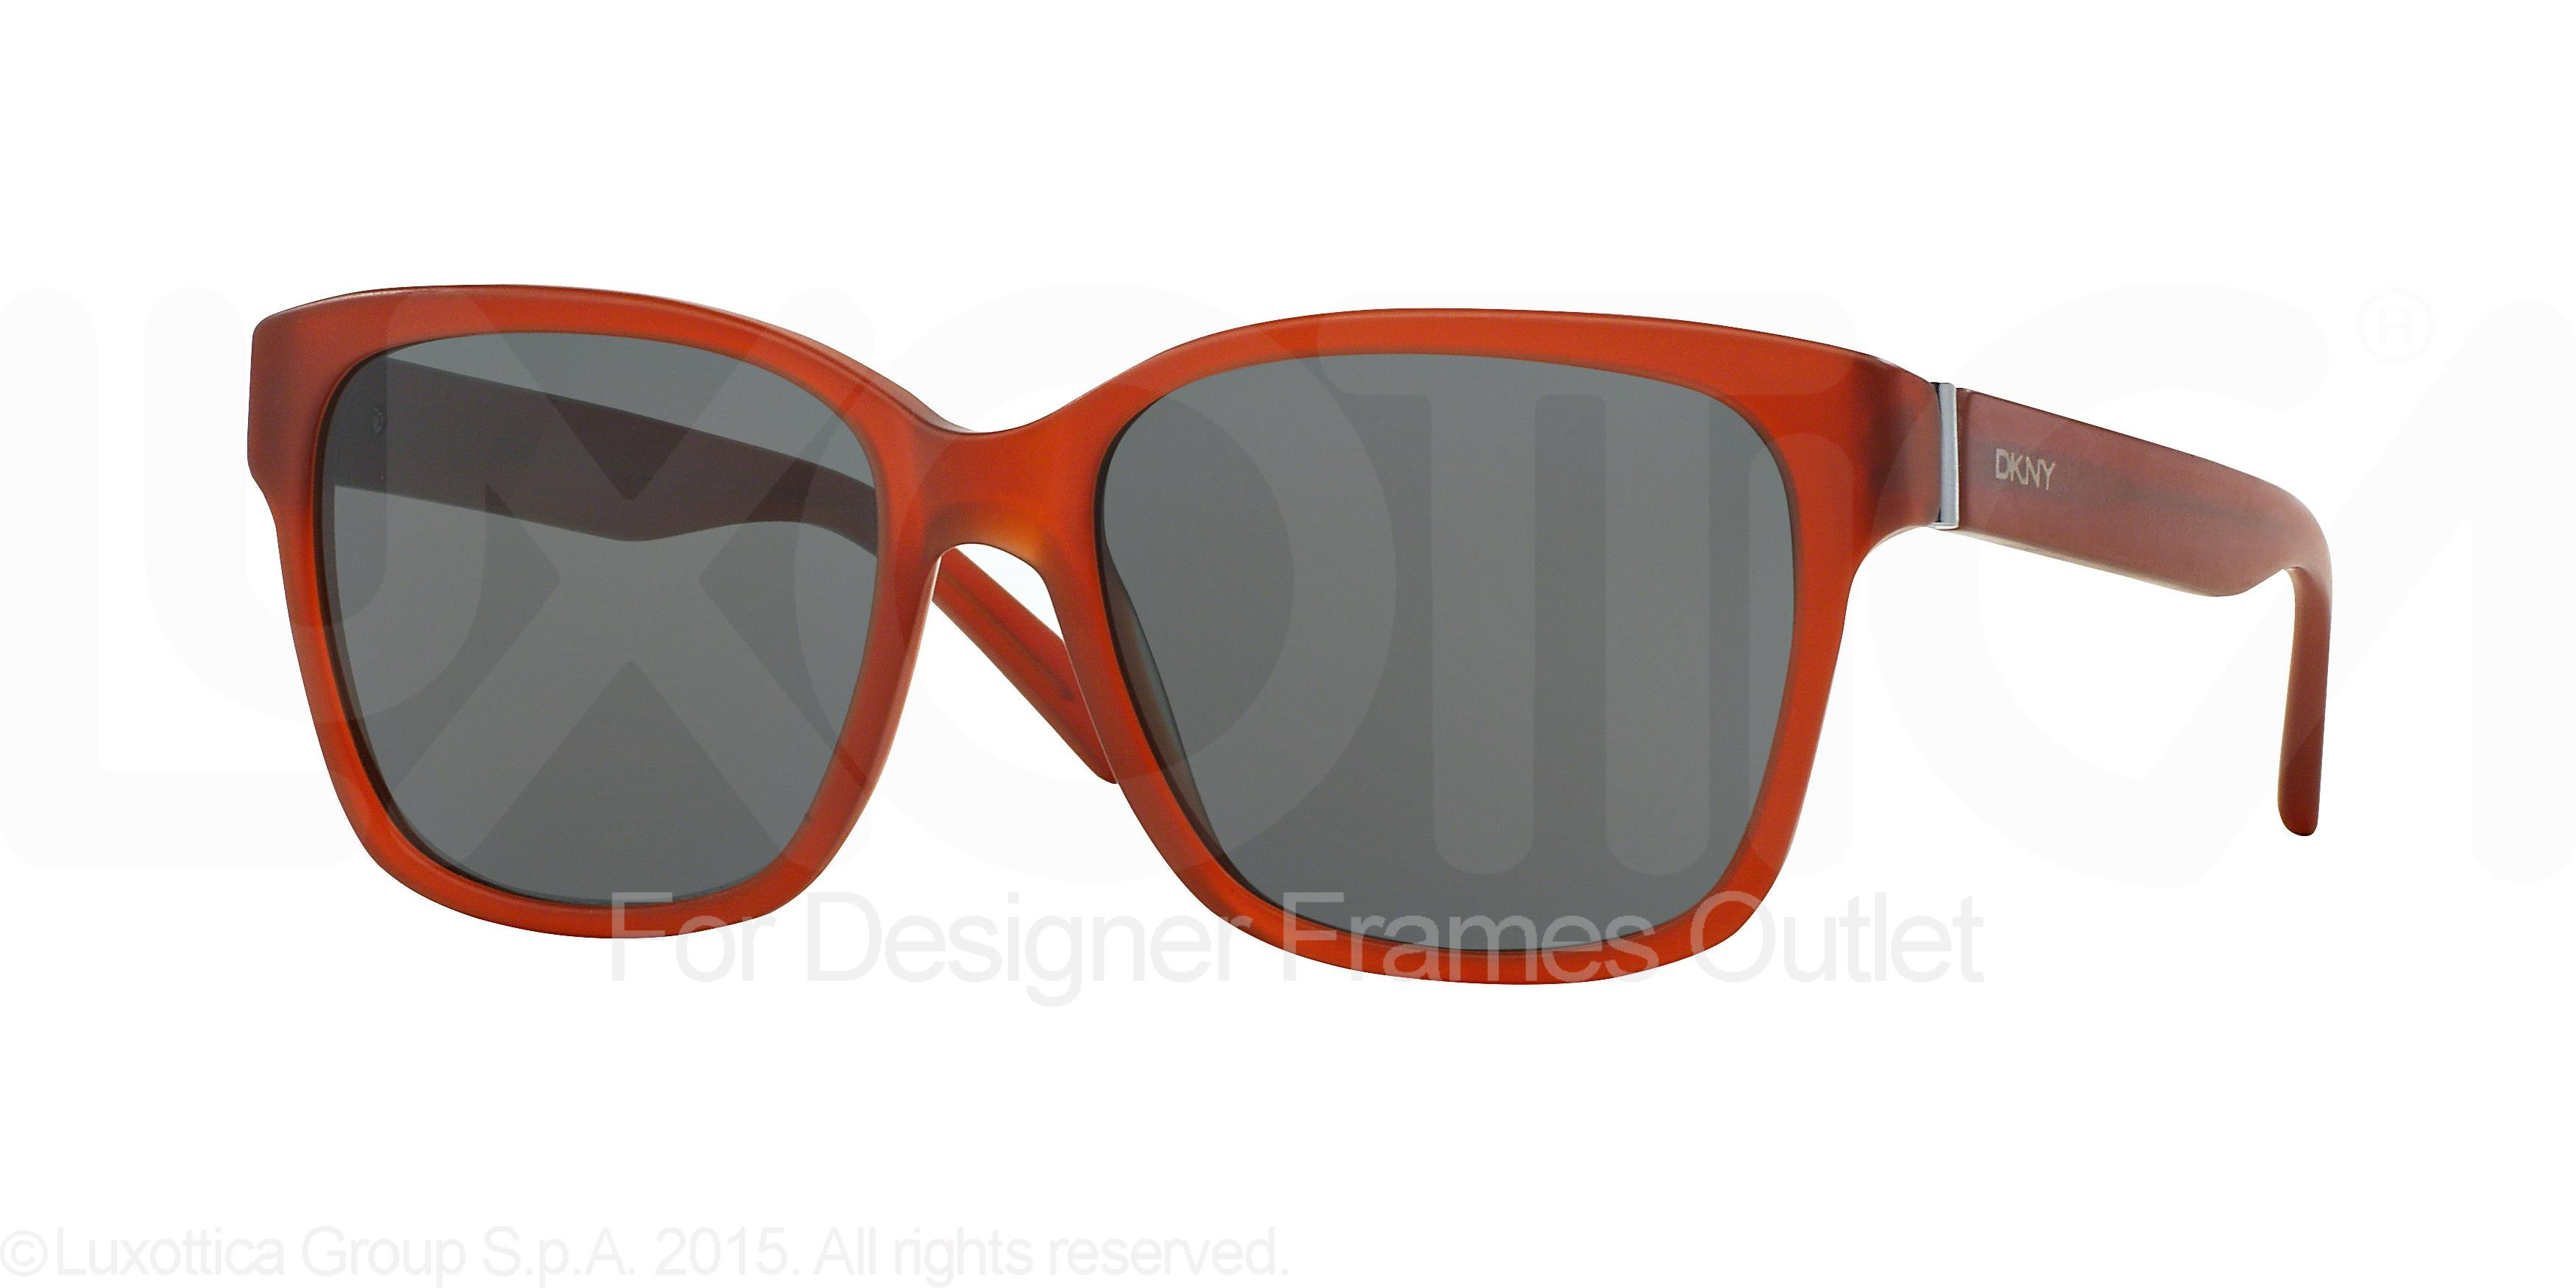 Picture of Dkny Sunglasses DY4096